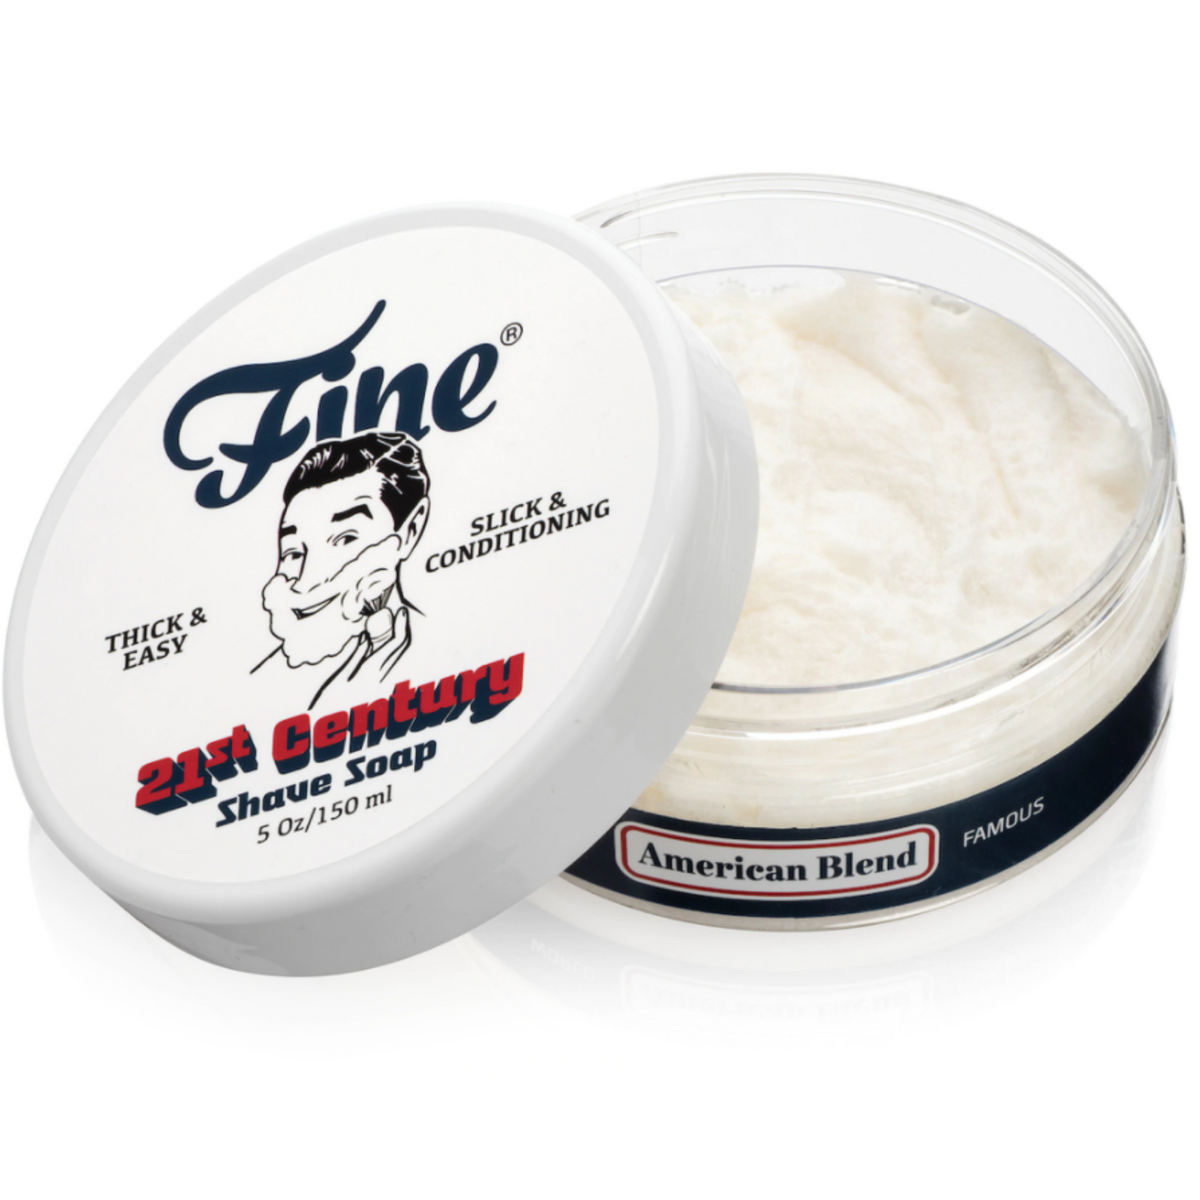 Primary image of American Blend Shave Soap